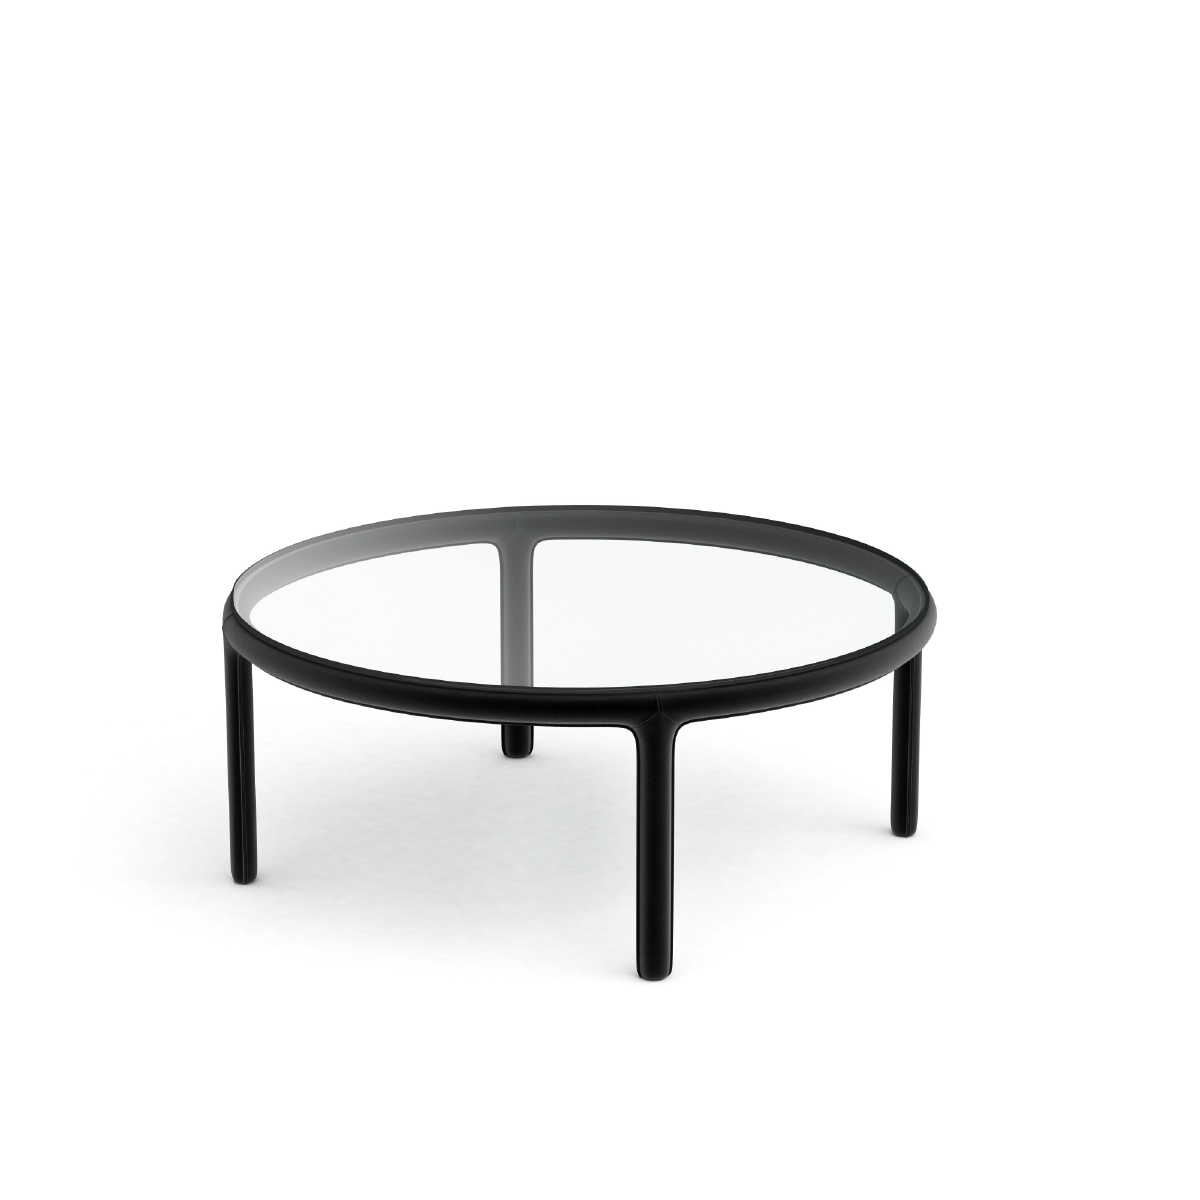 Stand Coffee Table form ¥9,850